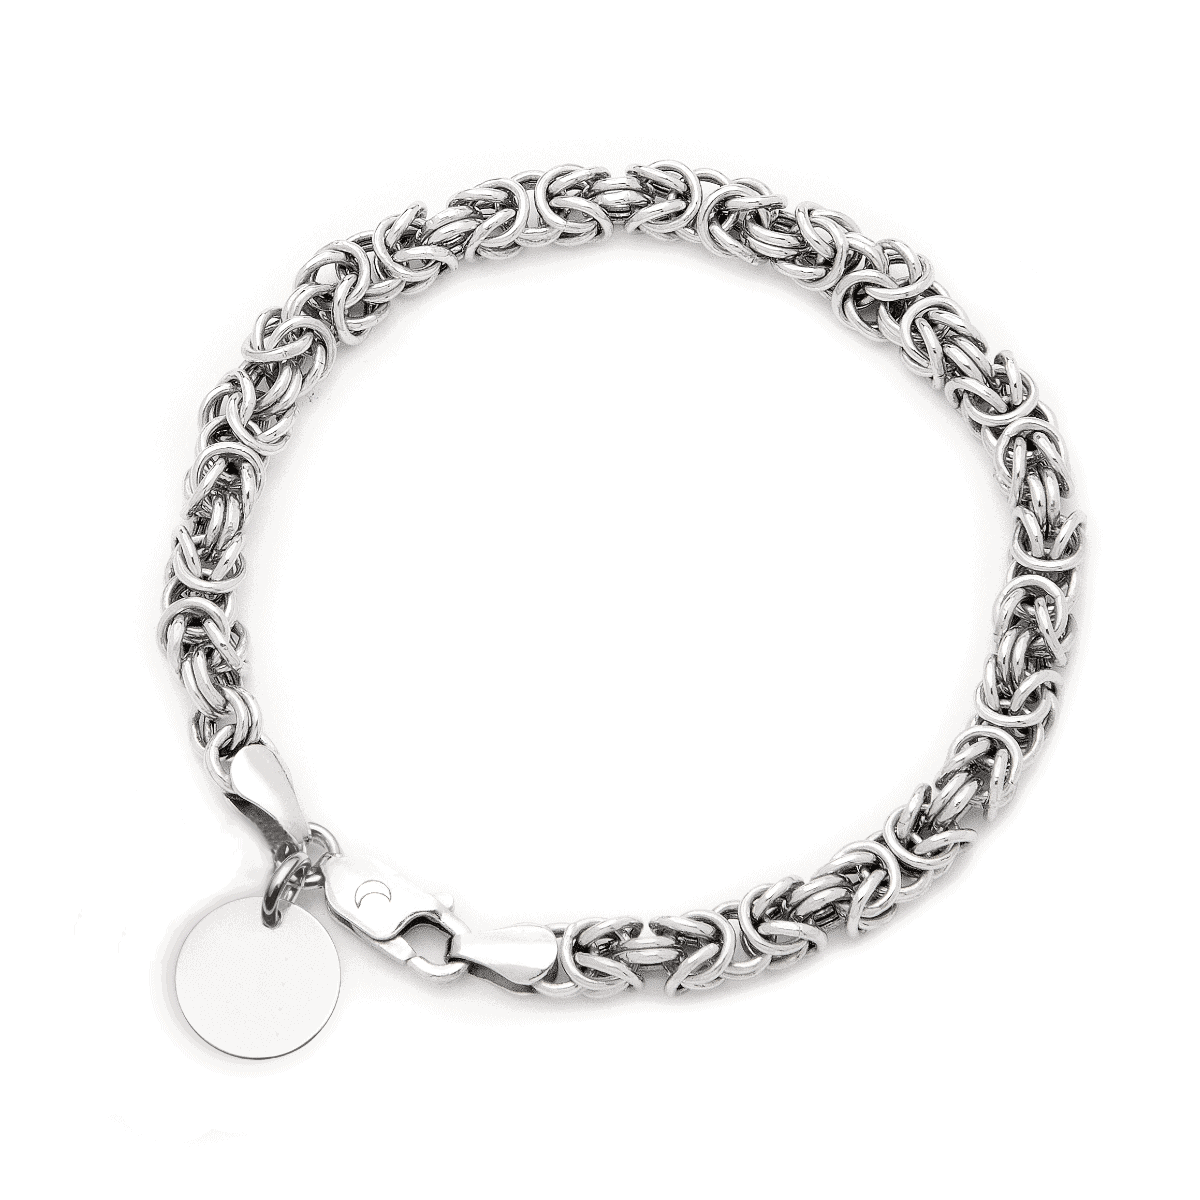 Silver bracelet with a round pendant and engraving.